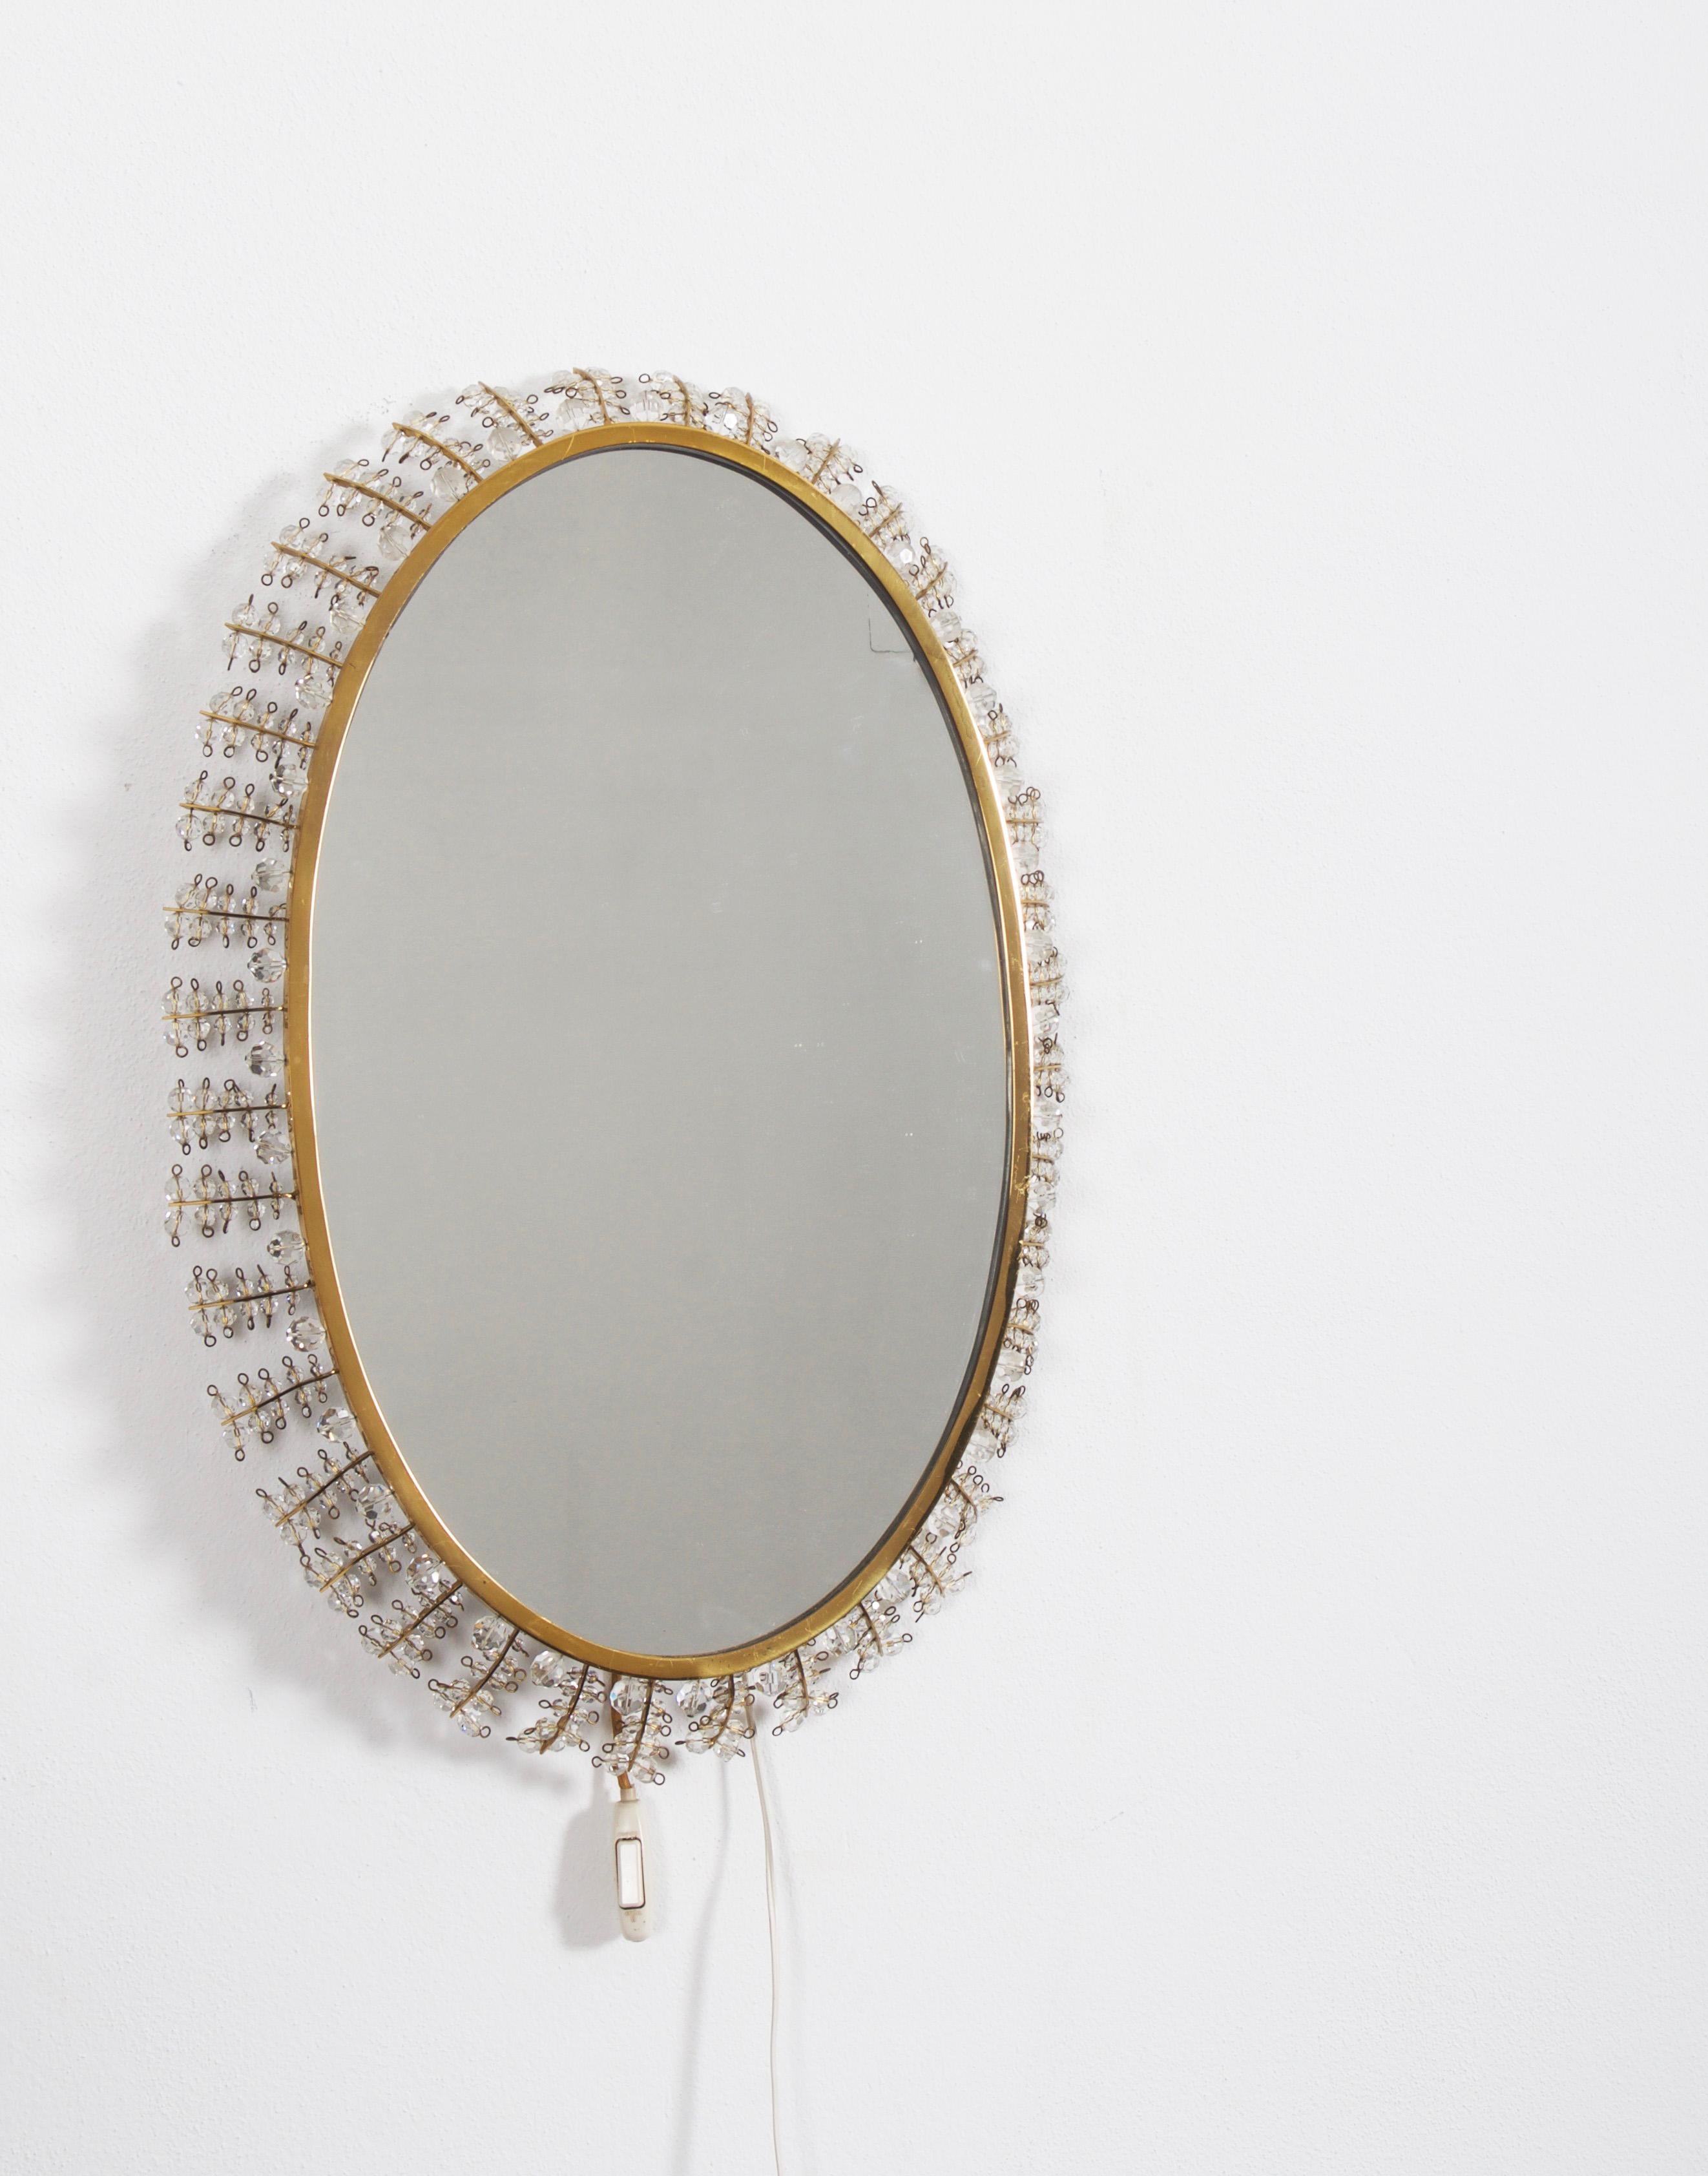 Illuminating vintage mirror by J.L Lobmryr from the 1960s.
Brass frame partially gold and nickel plated with glass perls
Fitted with six E12/E14 sockets up to 60Watts each.
Perfect vintage used condition.
  